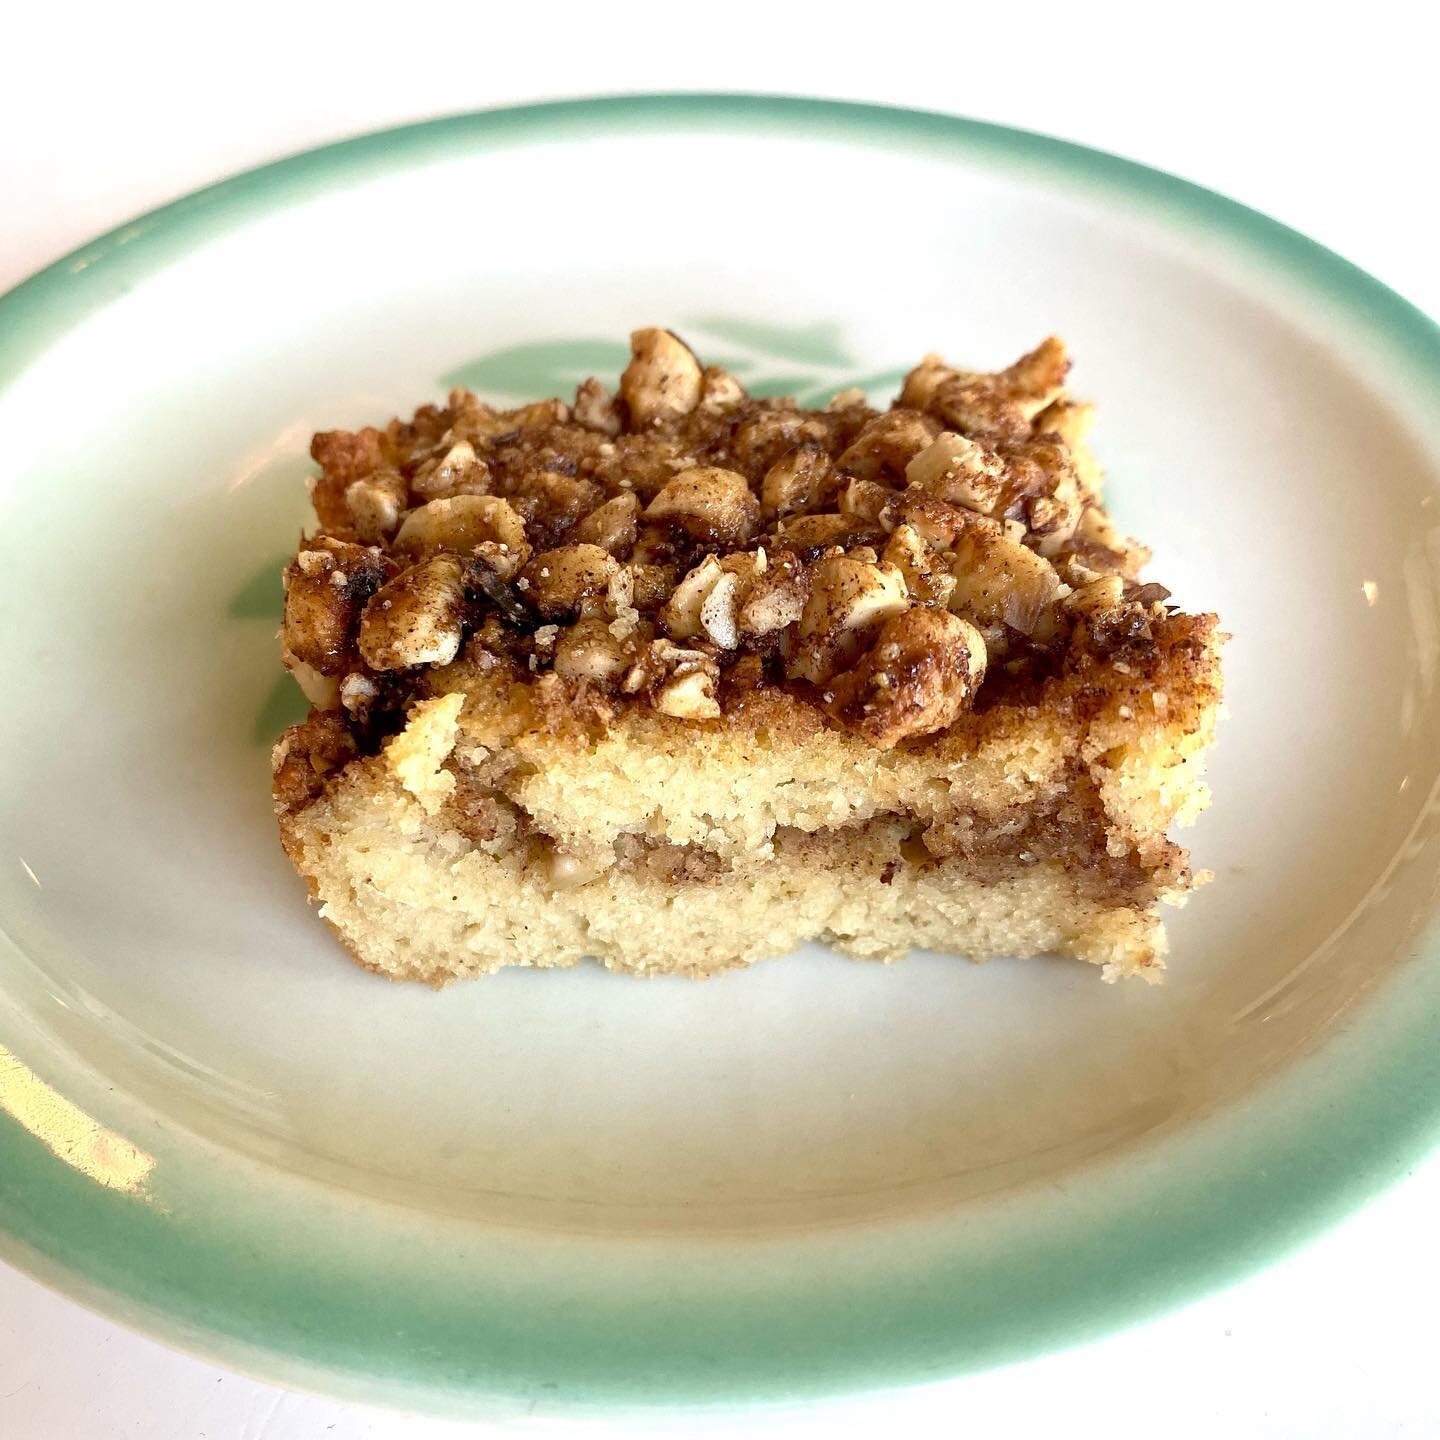 Coffee Cake (grain free)

Ingredients
Dry:
1/2 cup almond flour
1/2 cup coconut flour
1/2 cup of arrow root or cassava flour
2 tsp baking powder
1/2 tsp salt
Wet:
4 eggs
1/4 cup butter melted 
1/2 cup milk
1/4 cup maple syrup or honey
Streusel ingred